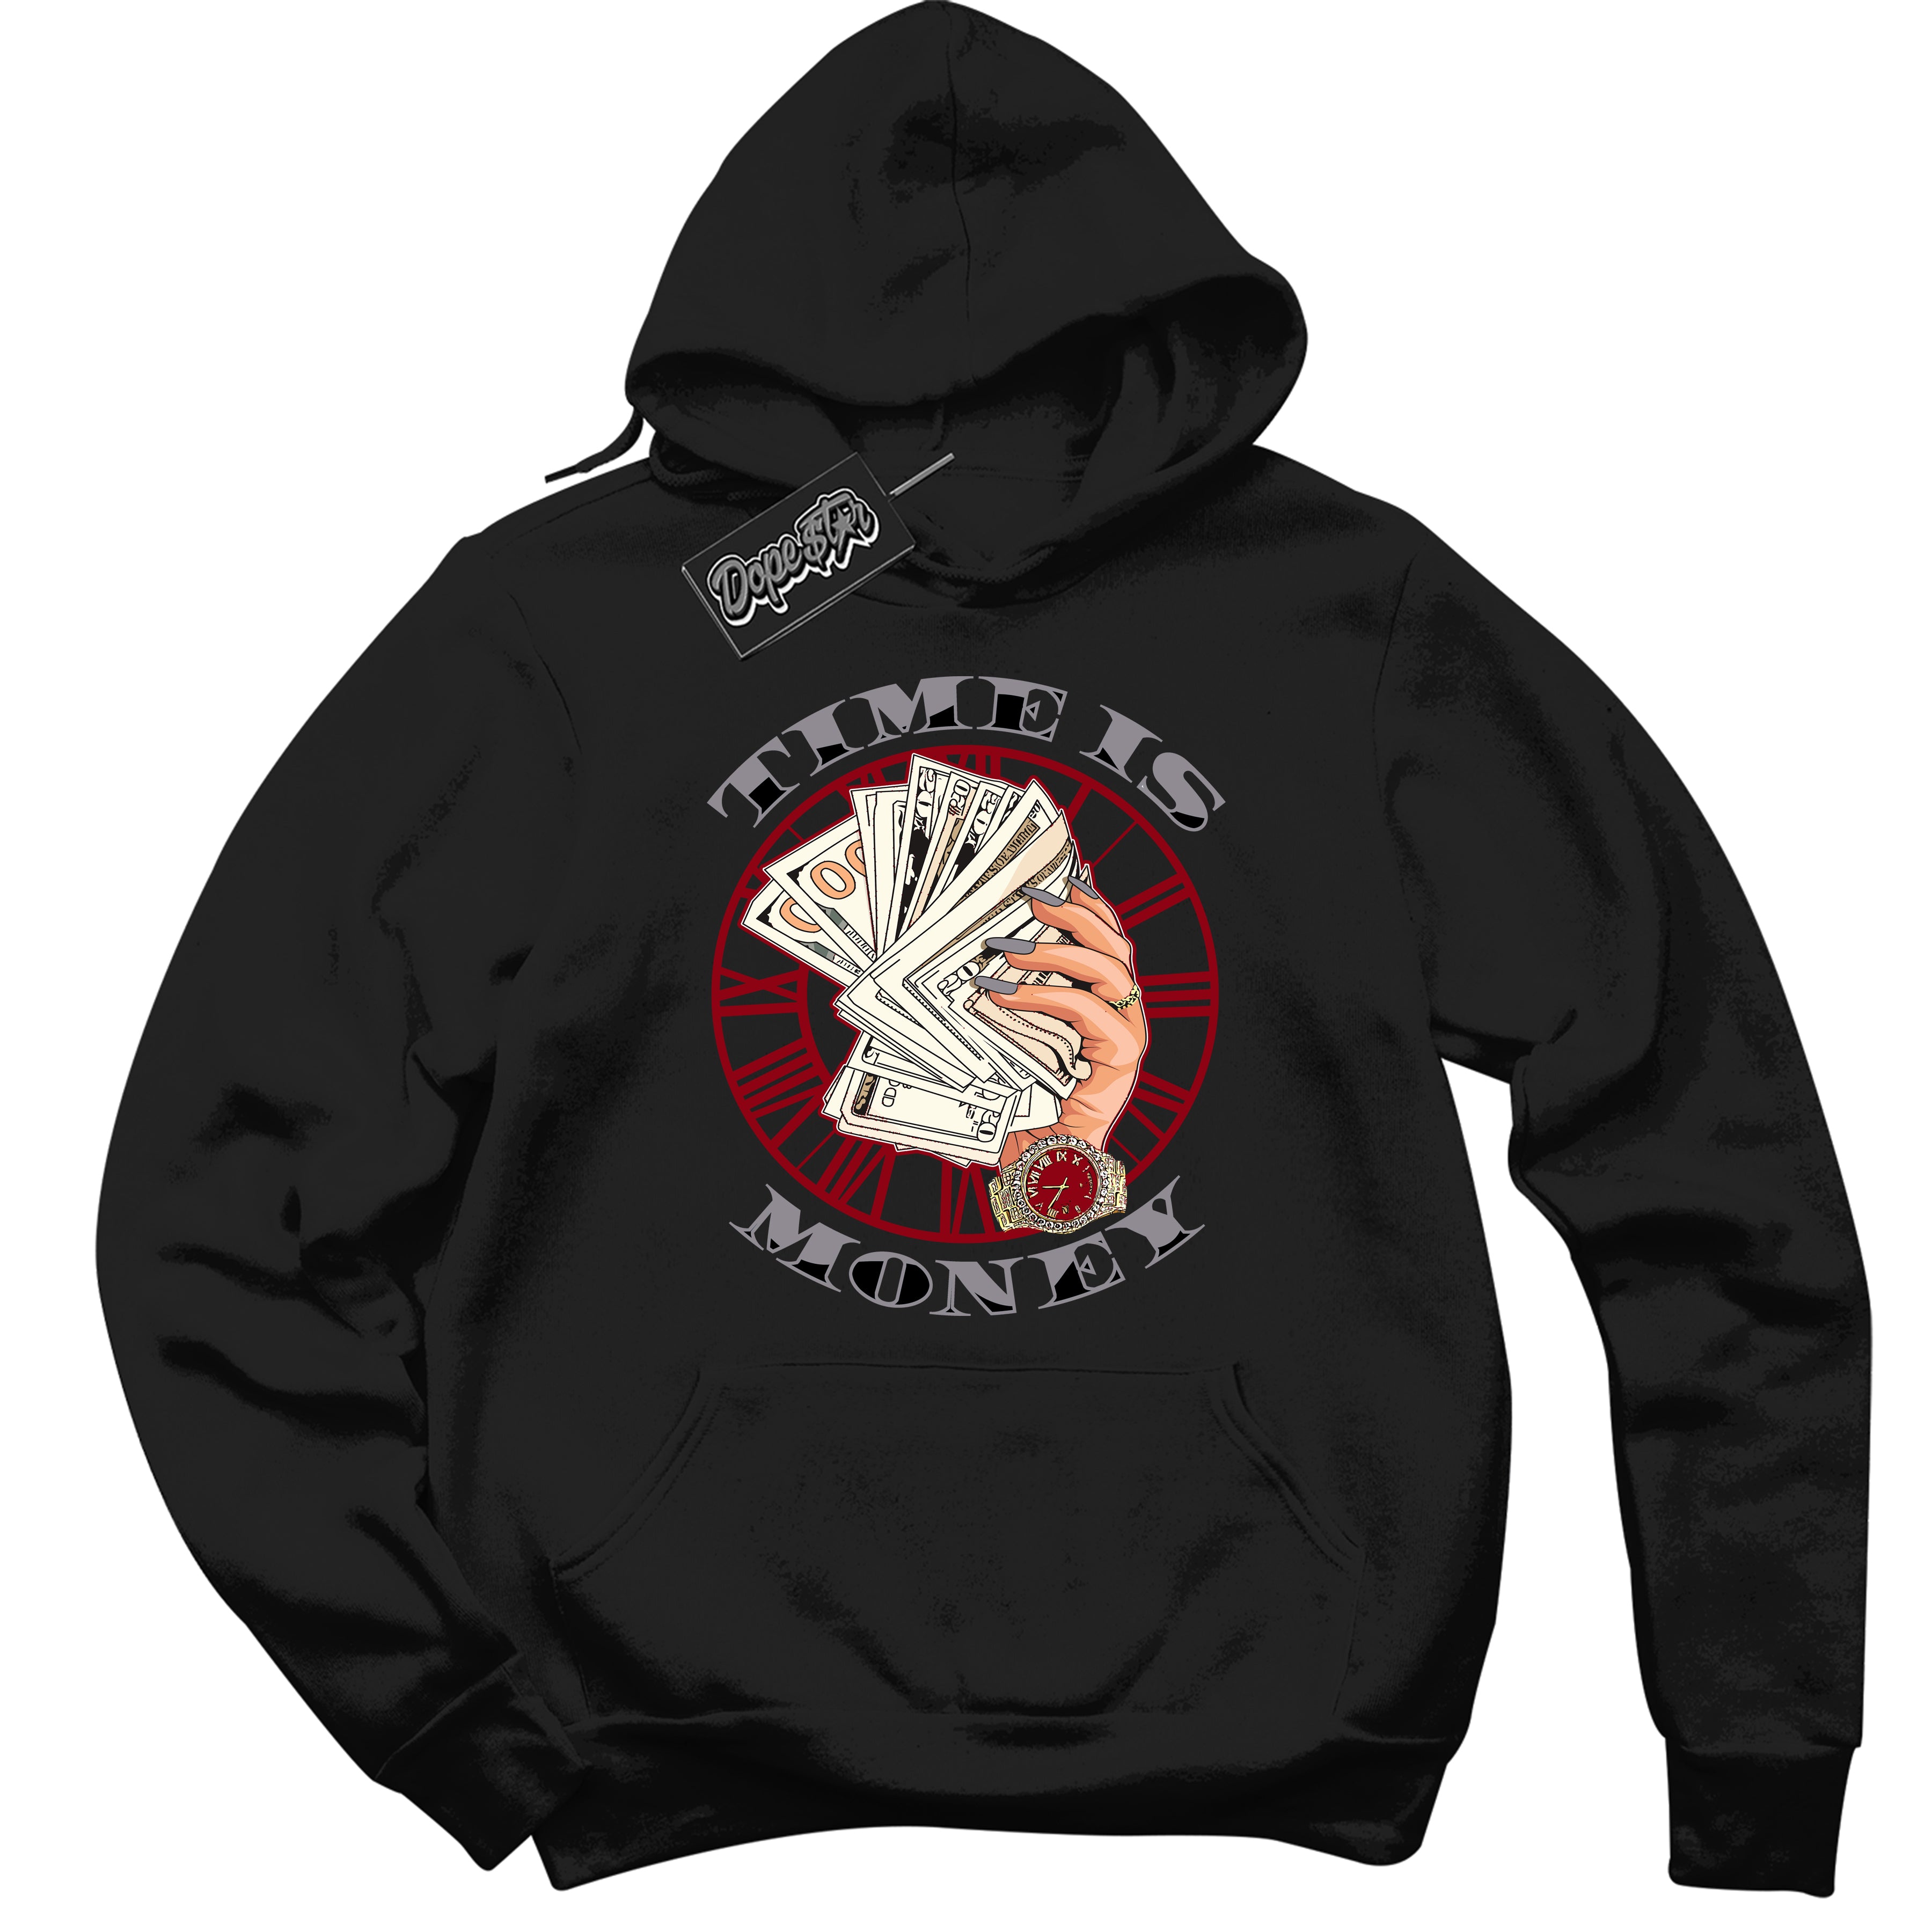 Cool Black Hoodie with “ Time Is Money ”  design that Perfectly Matches  Bred Reimagined 4s Jordans.